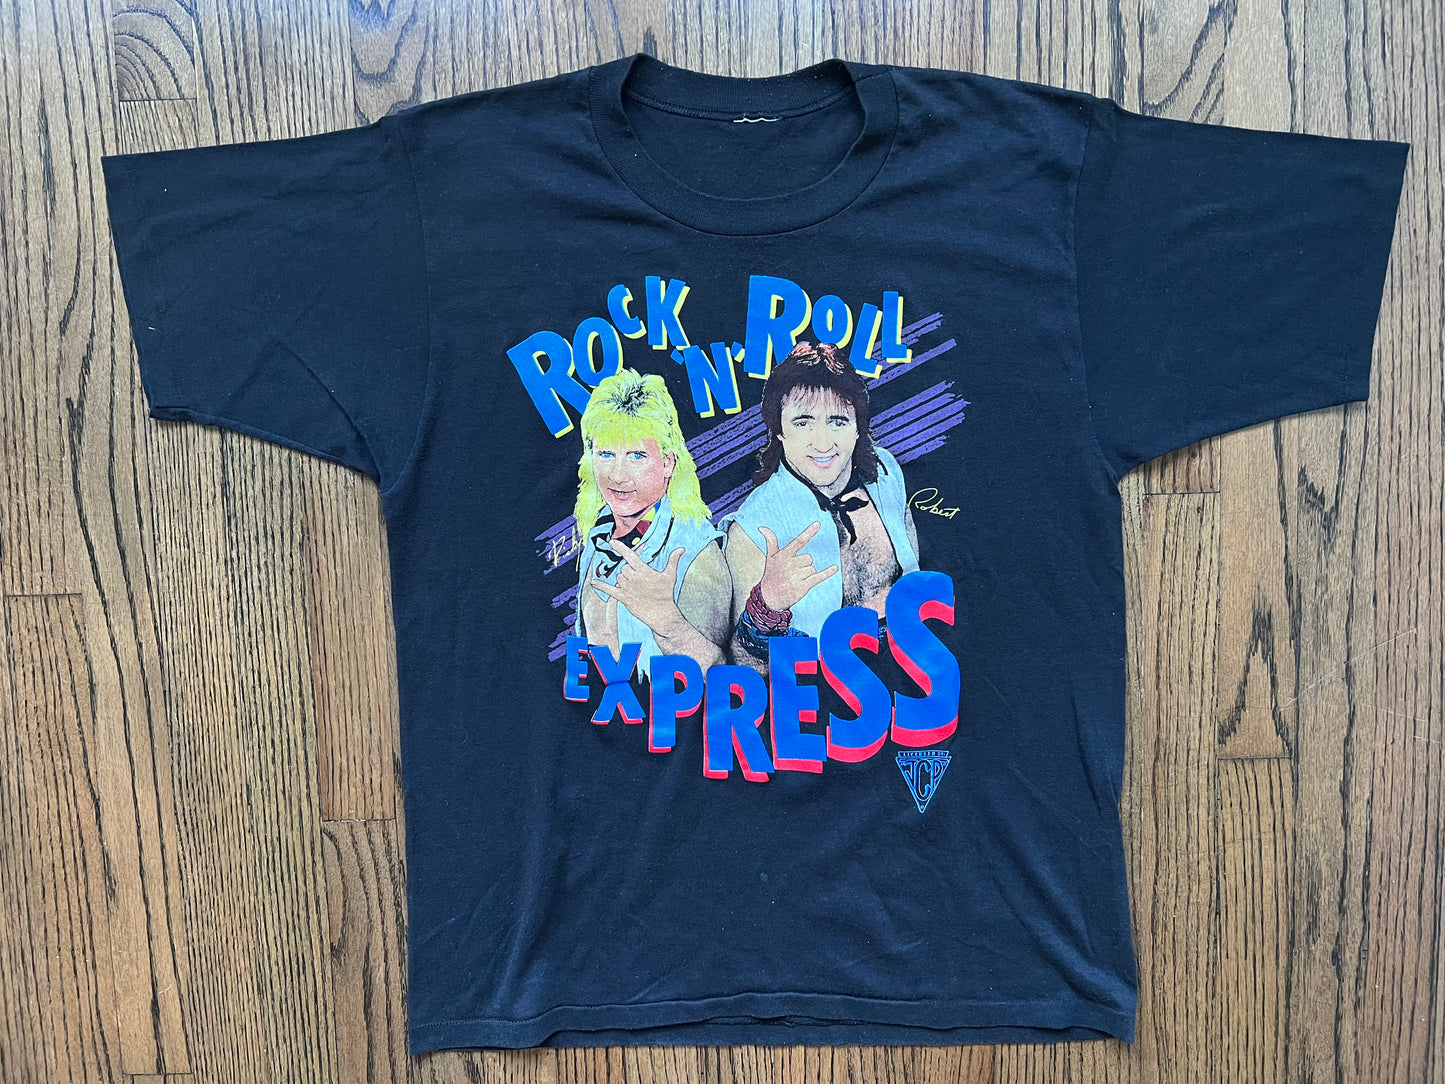 1986 NWA JCP Rock N Roll Express Shirt featuring Ricky Morton and Robert Gibson